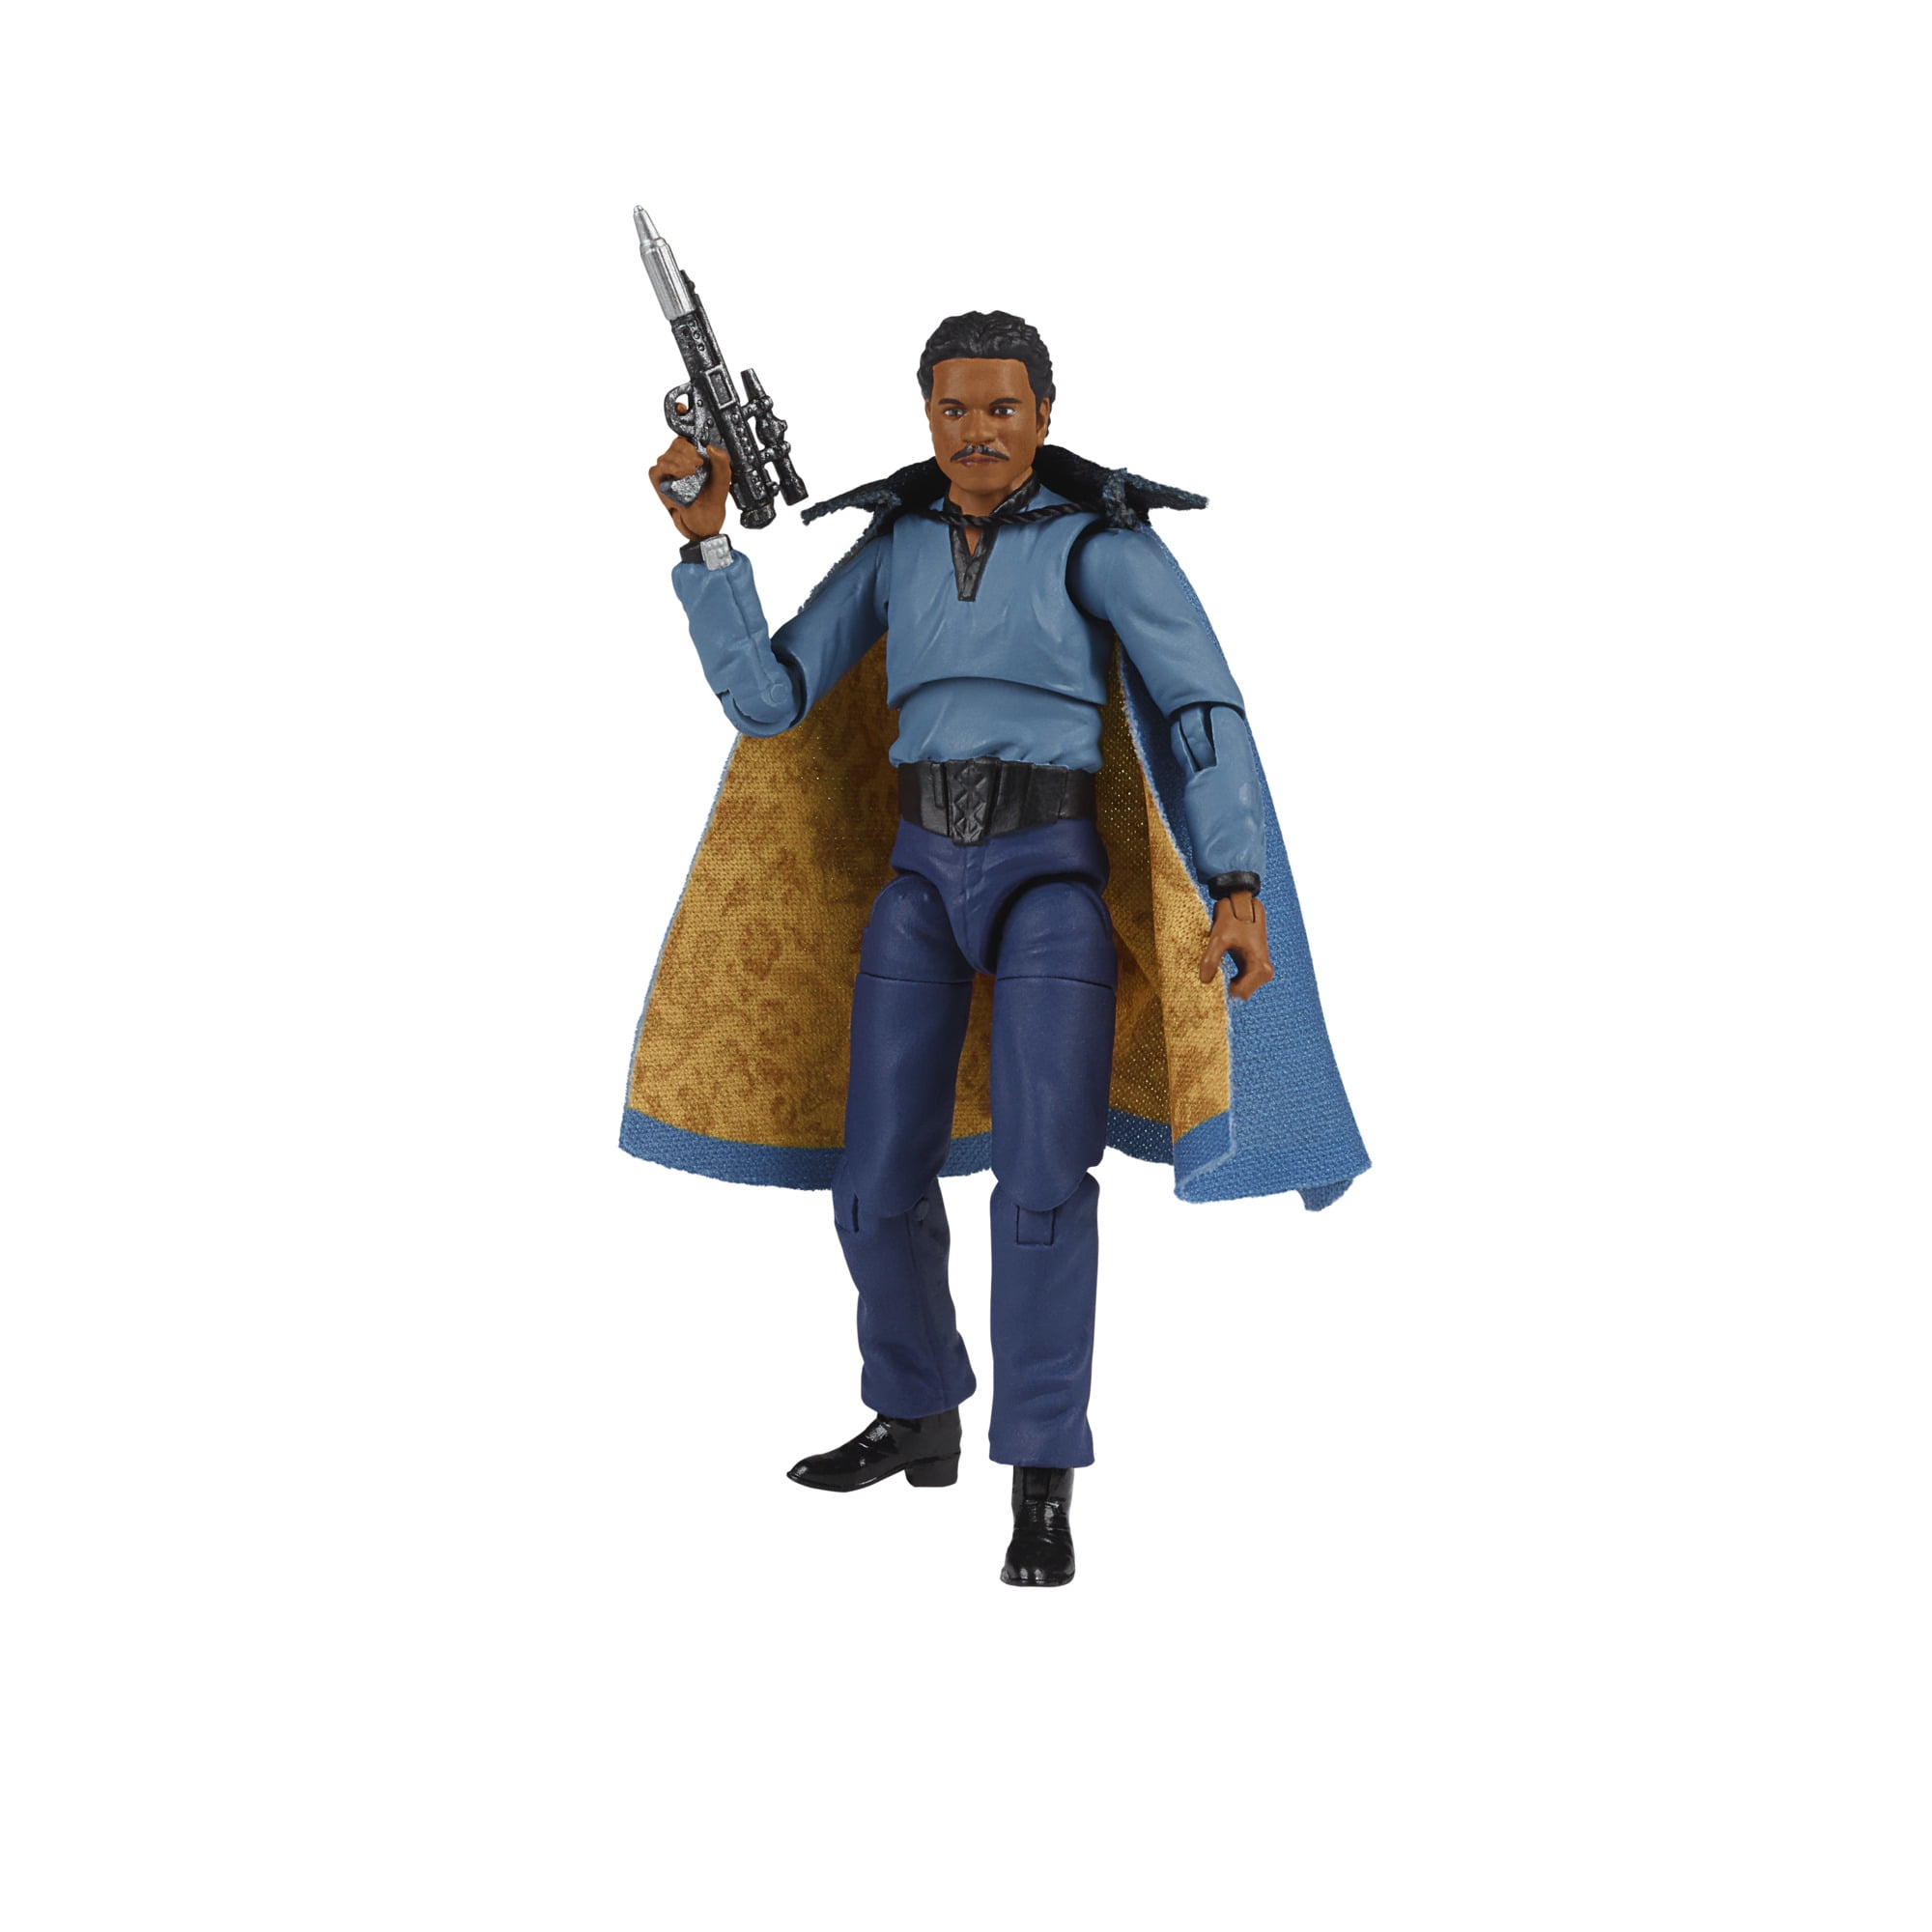 Star Wars Retro Collection Kenner Lando Calrissian Only $5 USA SHIP IN HAND VNTG 